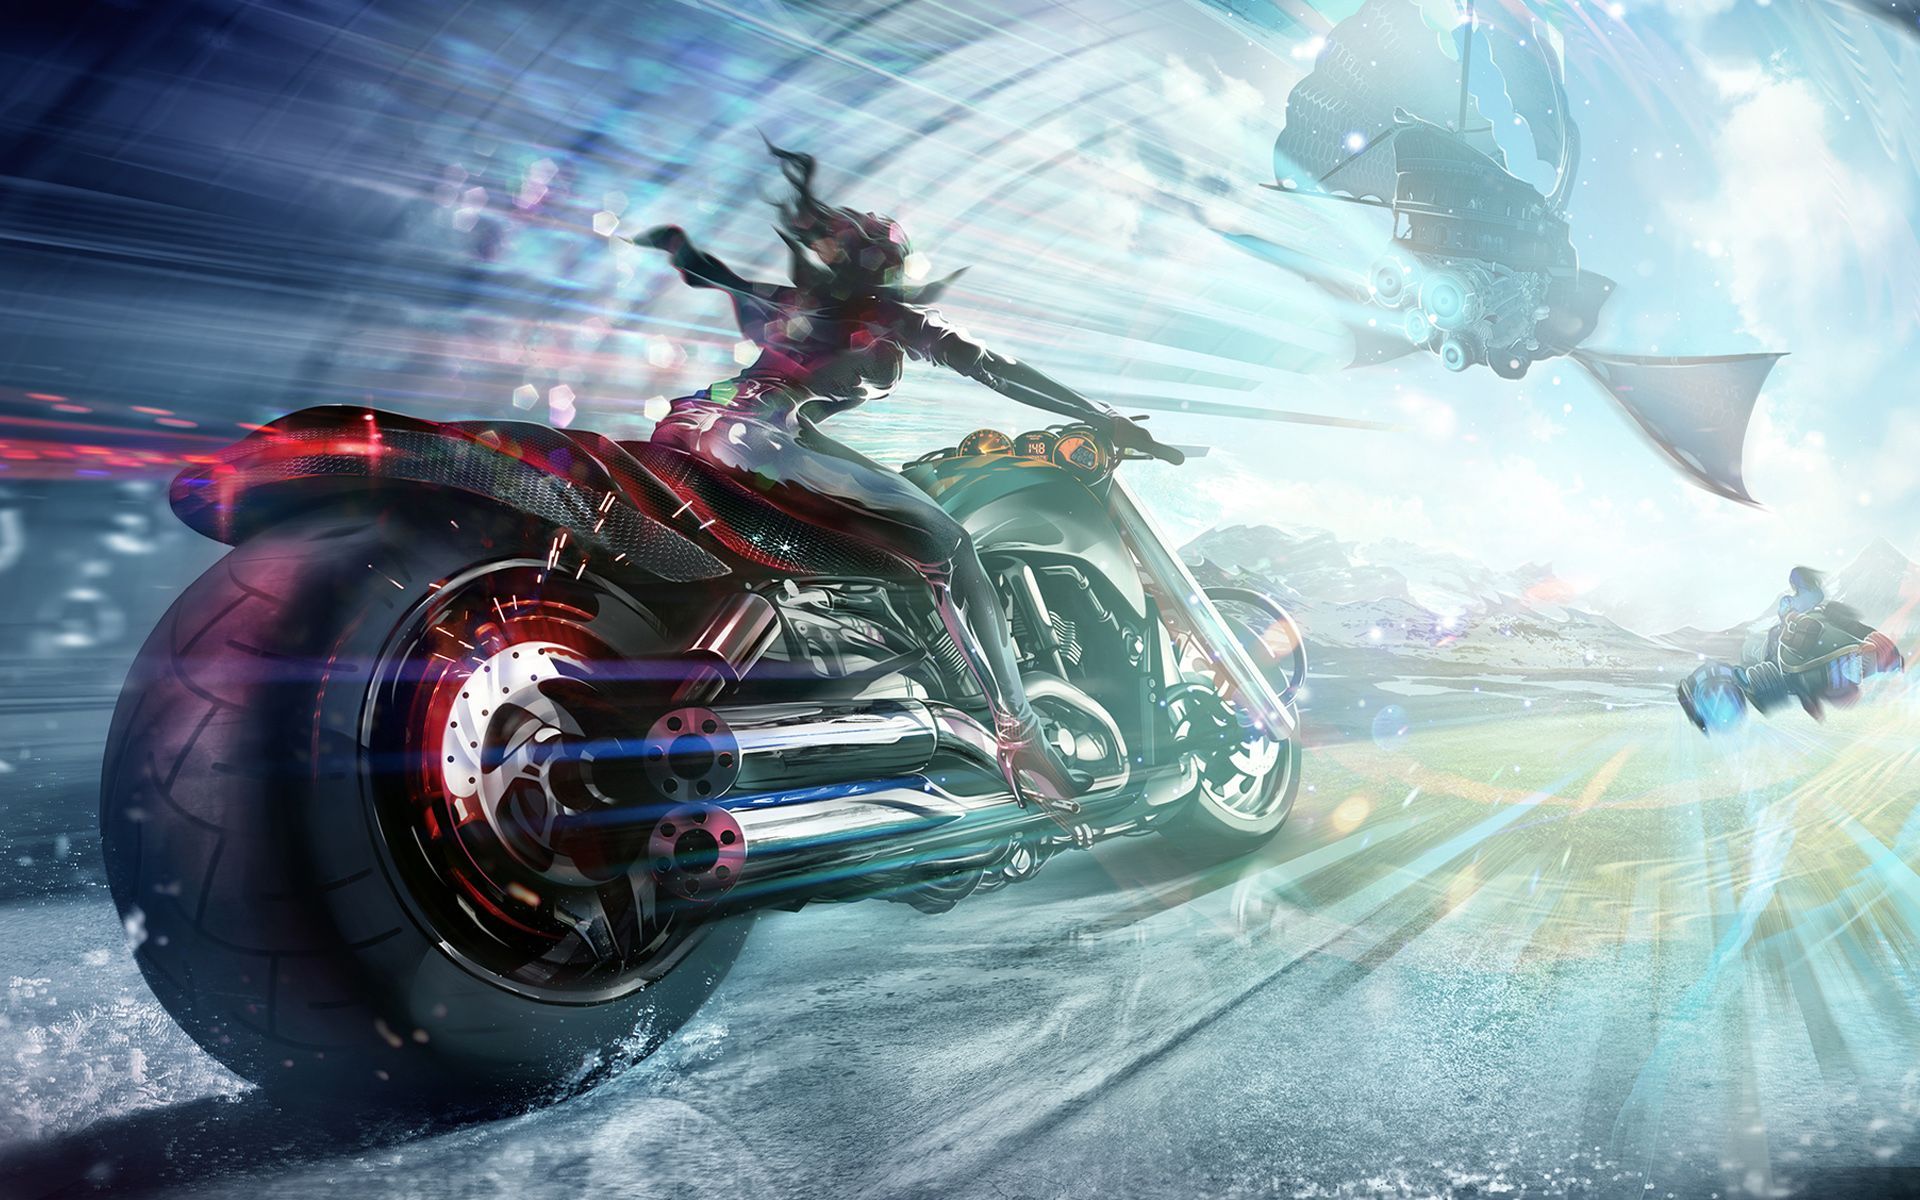 Anime Motorcycle Wallpaper Free Anime Motorcycle Background